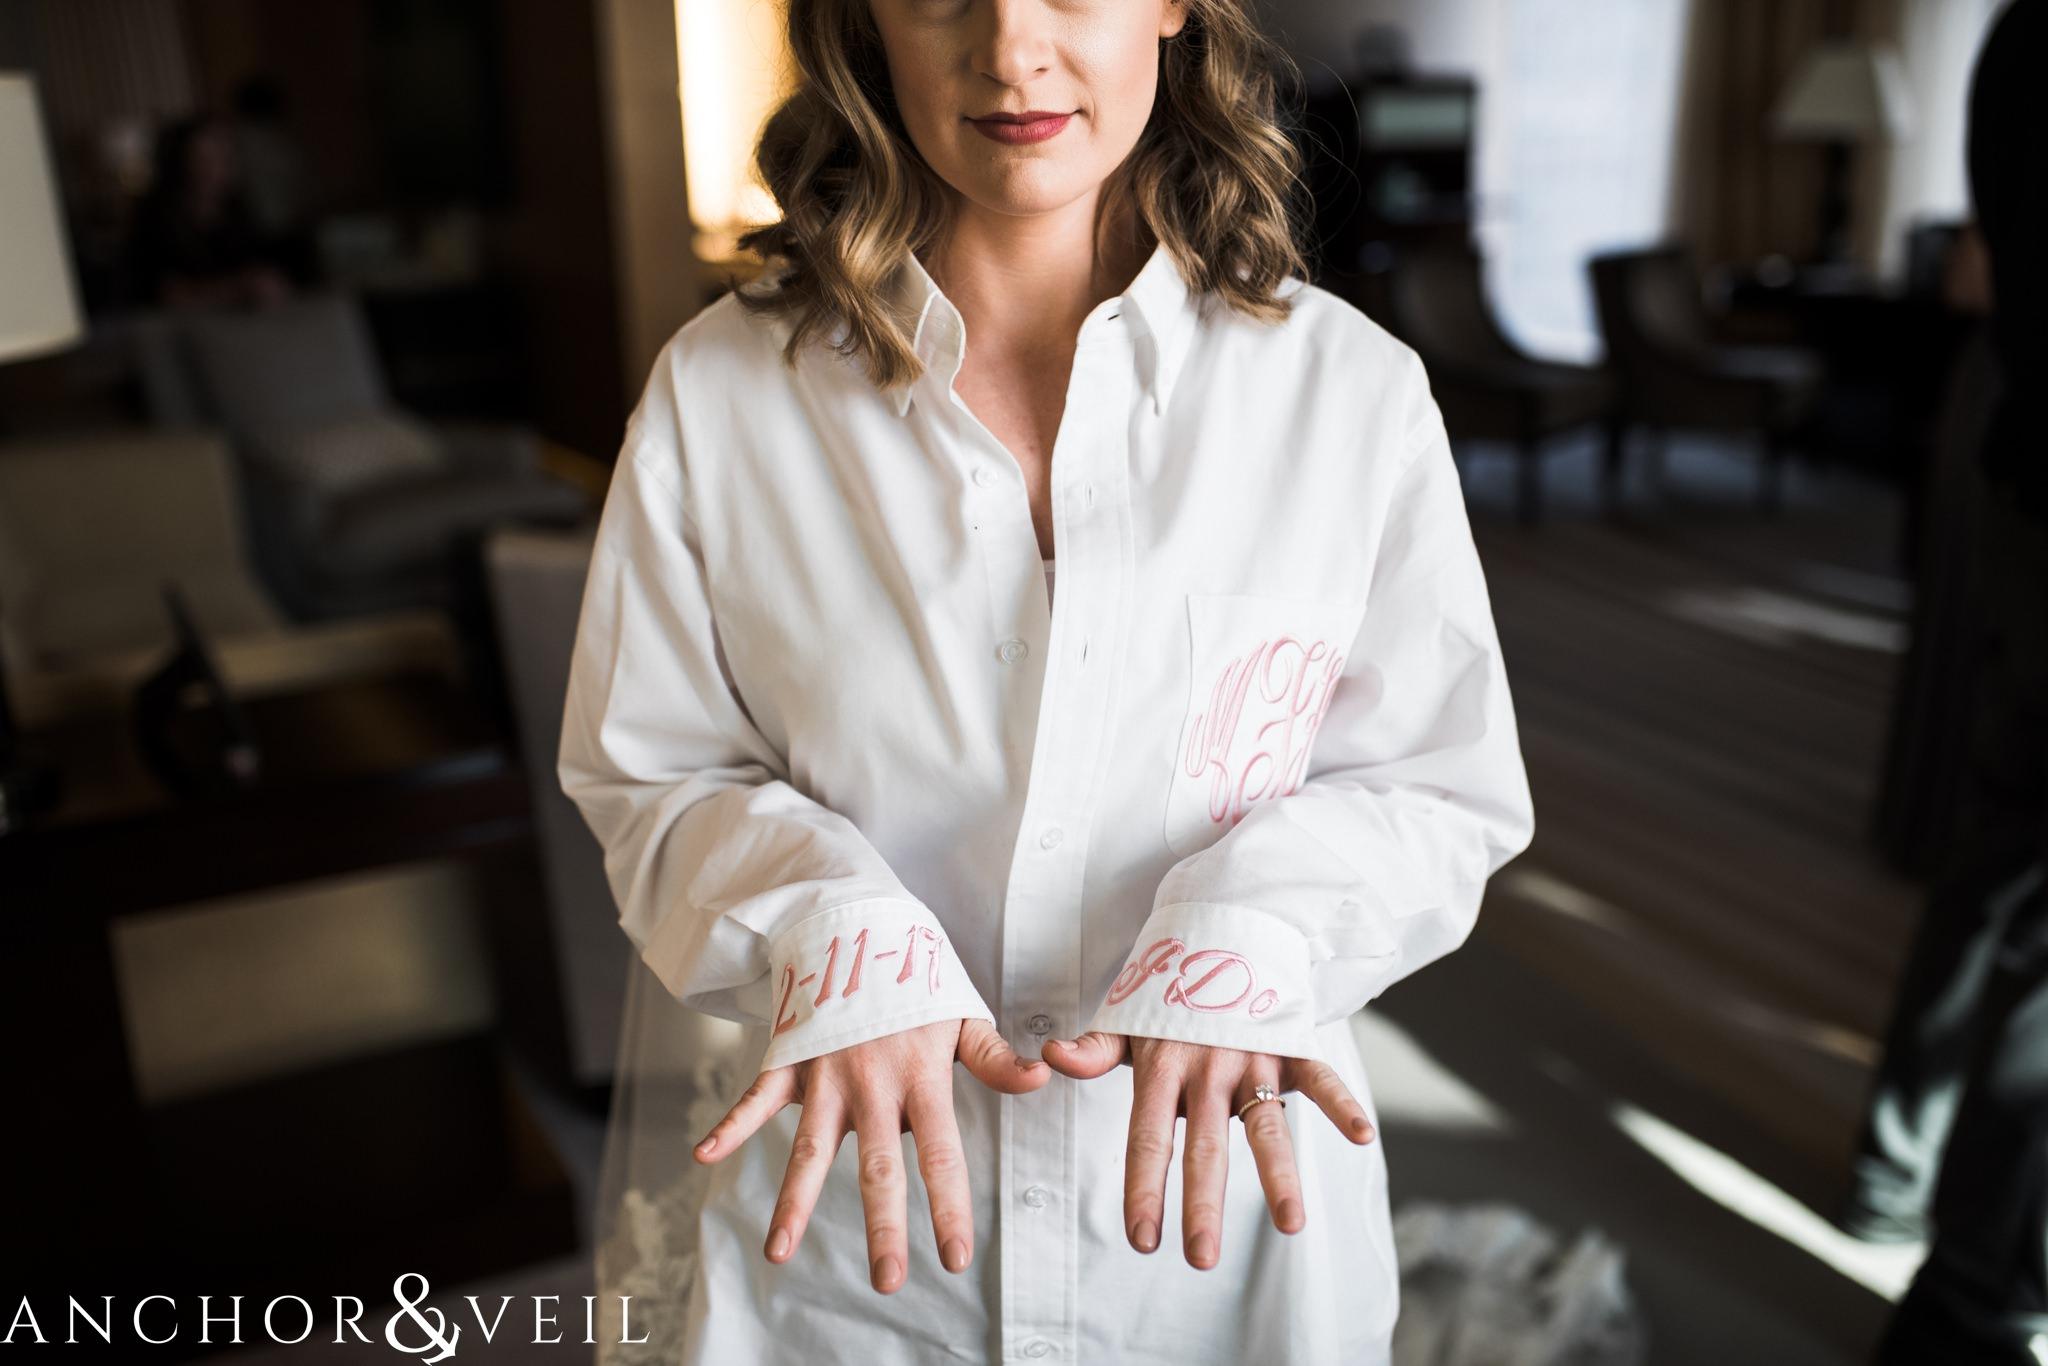 I do dress while getting ready during their ritz Carlton wedding in Uptown Charlotte NC